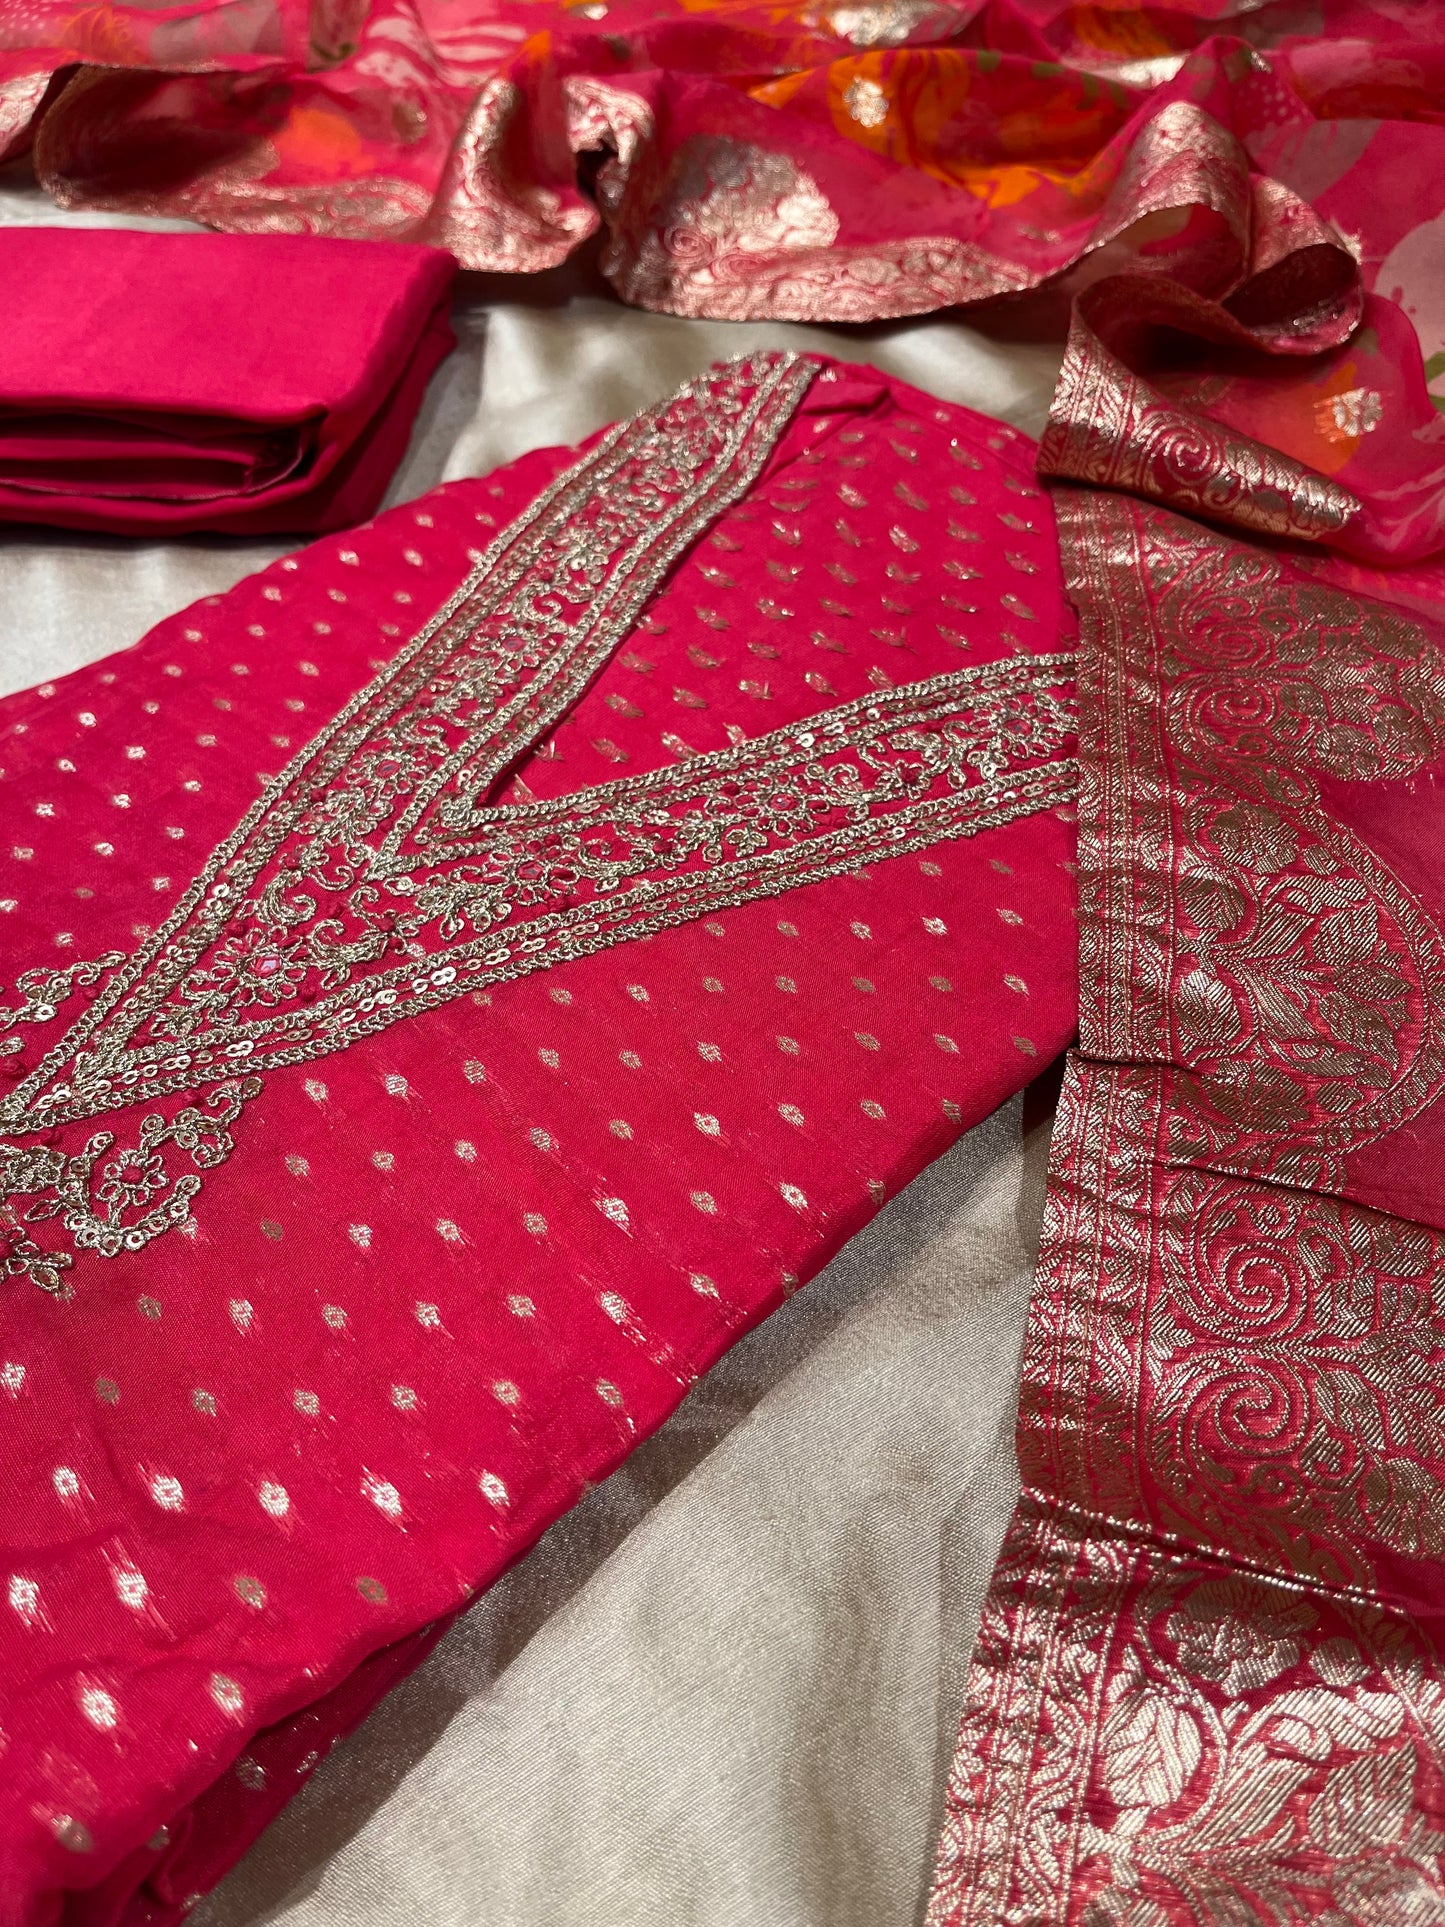 HOT PINK COLOUR ORGANZA UNSTITCHED SUIT WITH PRINTED BANARASI DUPATTA